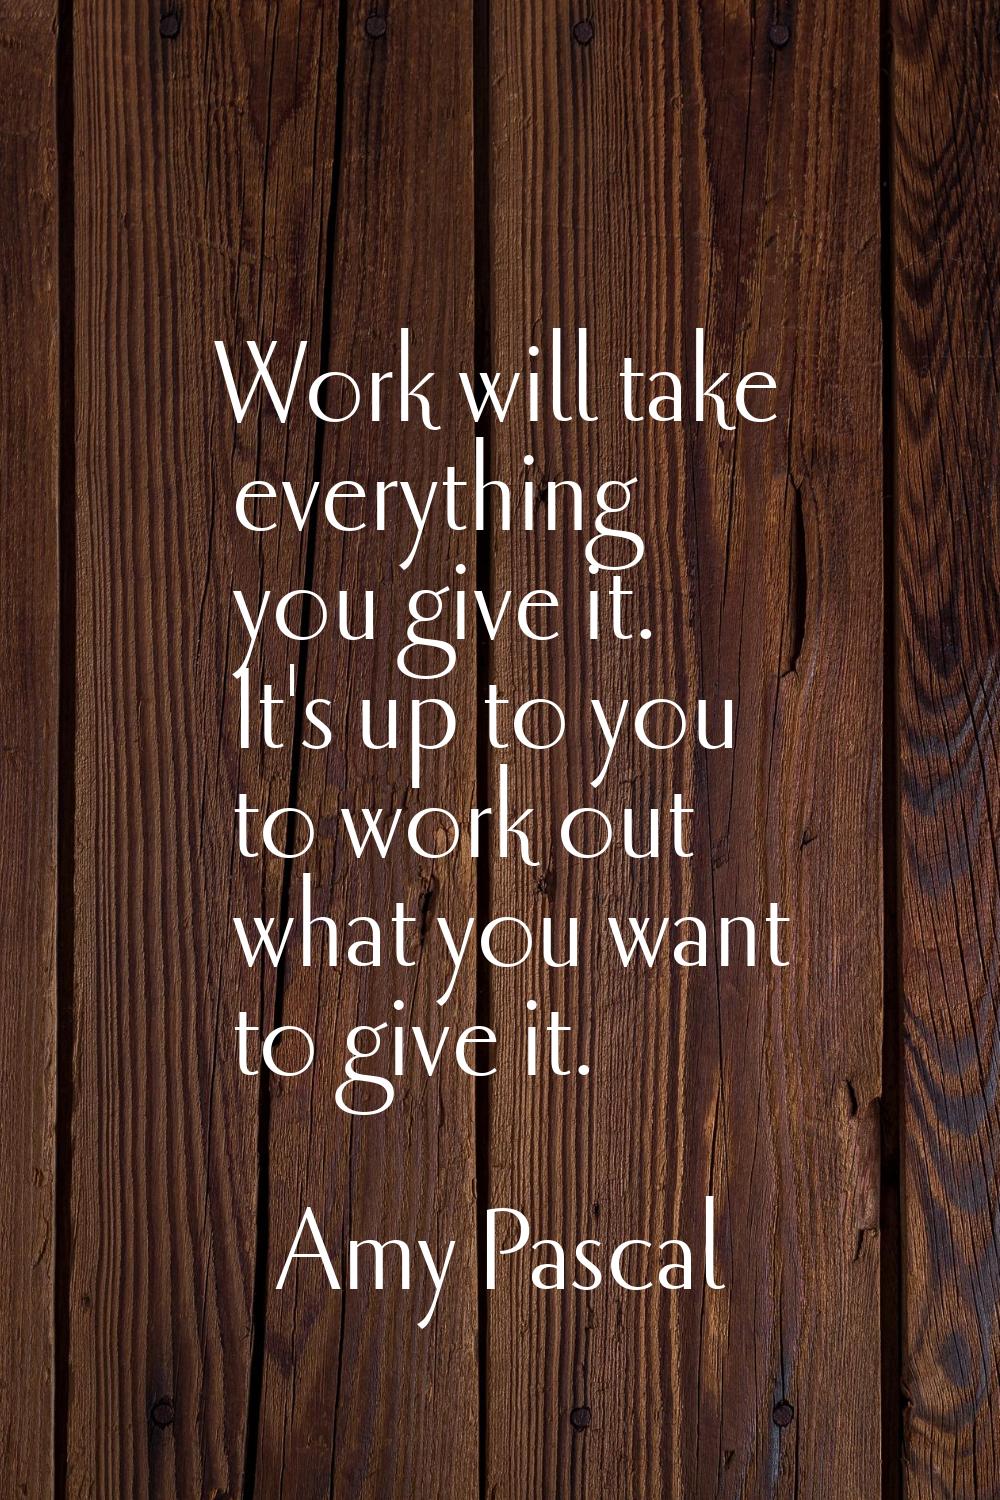 Work will take everything you give it. It's up to you to work out what you want to give it.